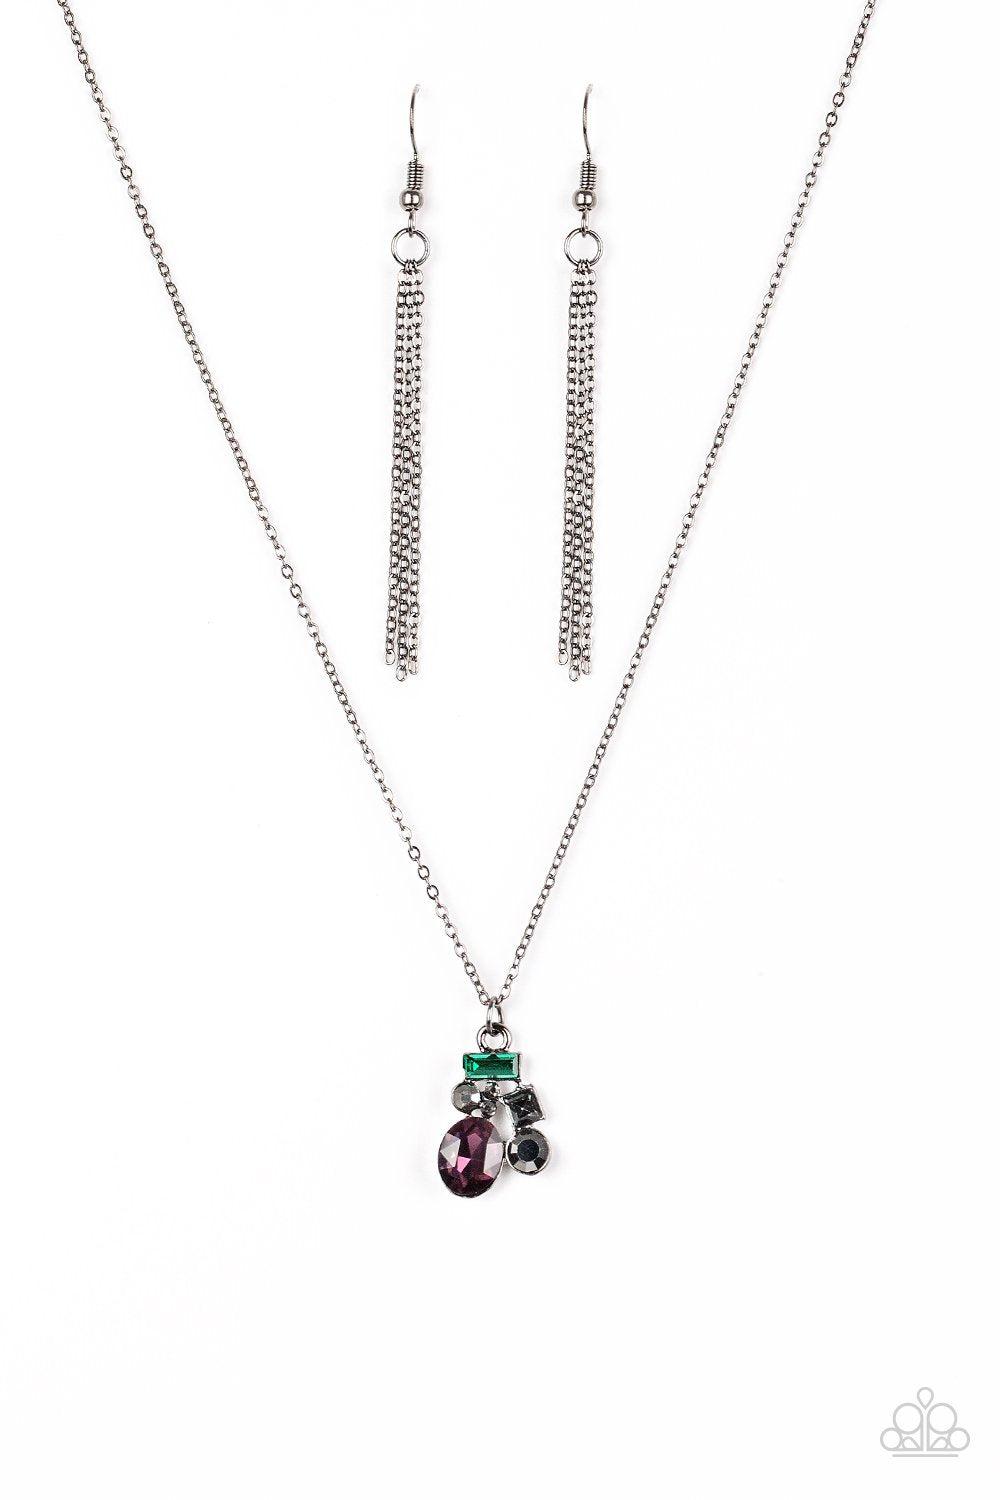 Time to be Timeless Multi-color Gem Necklace and matching Earrings - Paparazzi Accessories-CarasShop.com - $5 Jewelry by Cara Jewels